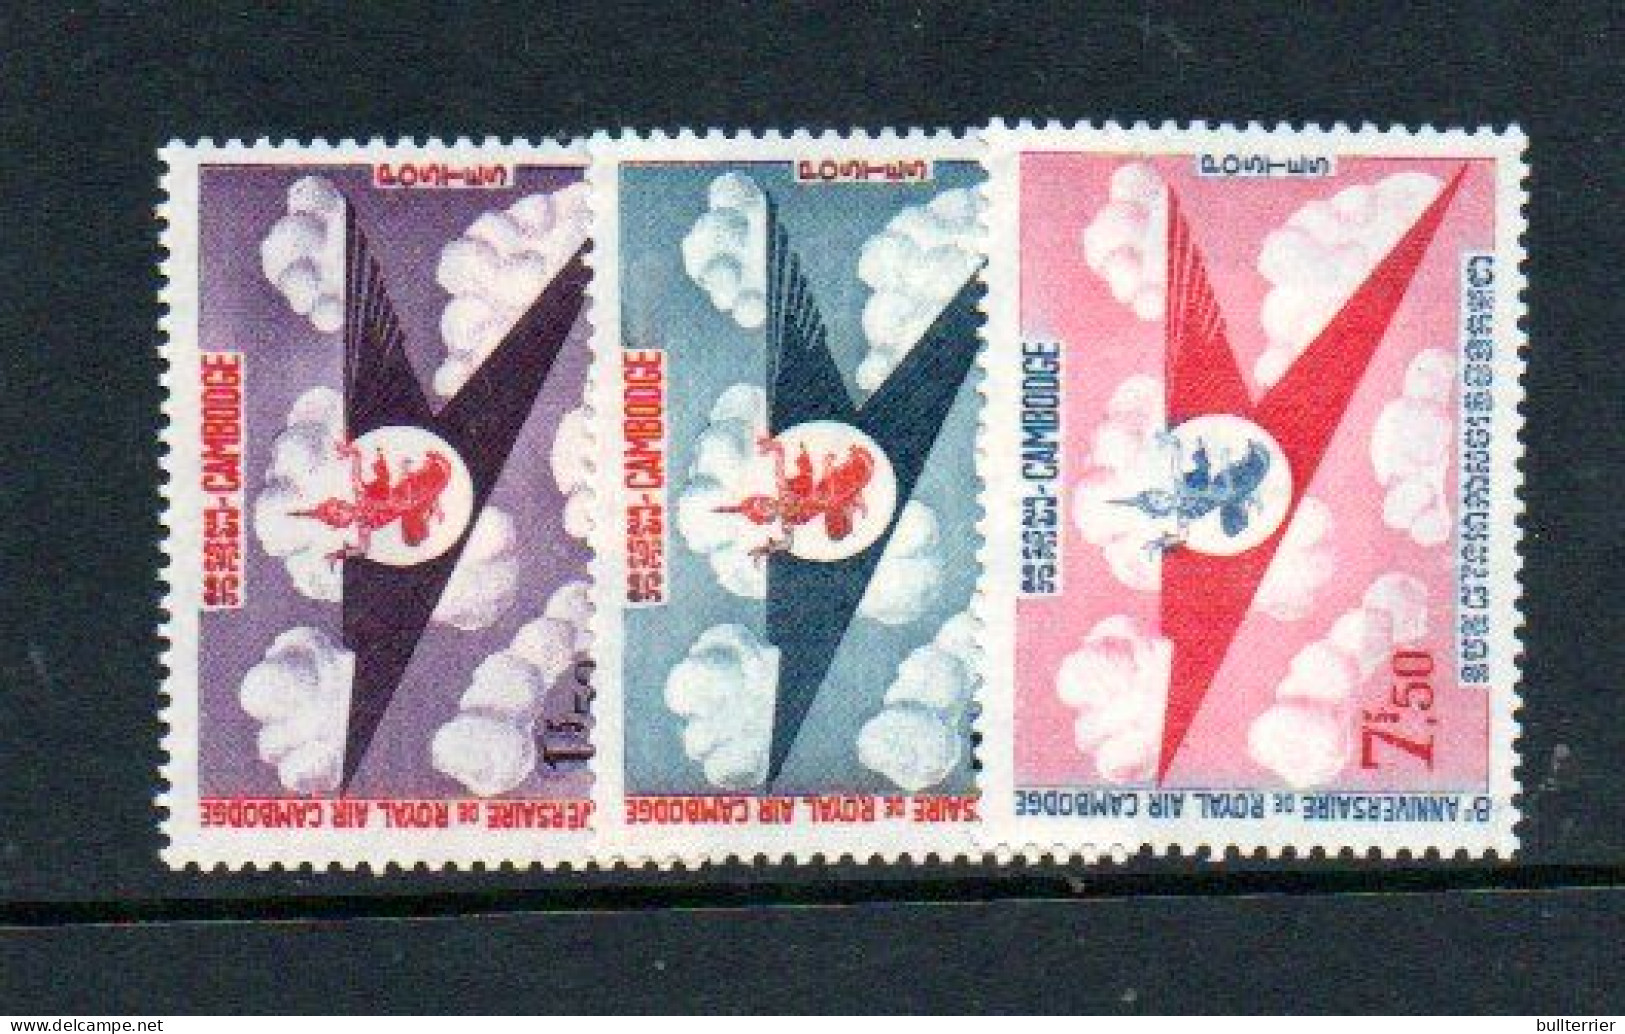 CAMBODIA - 1964- CAMBODIAN ROYAL AIR FORCE SET OF 3  MINT NEVER HINGED - Cambodge